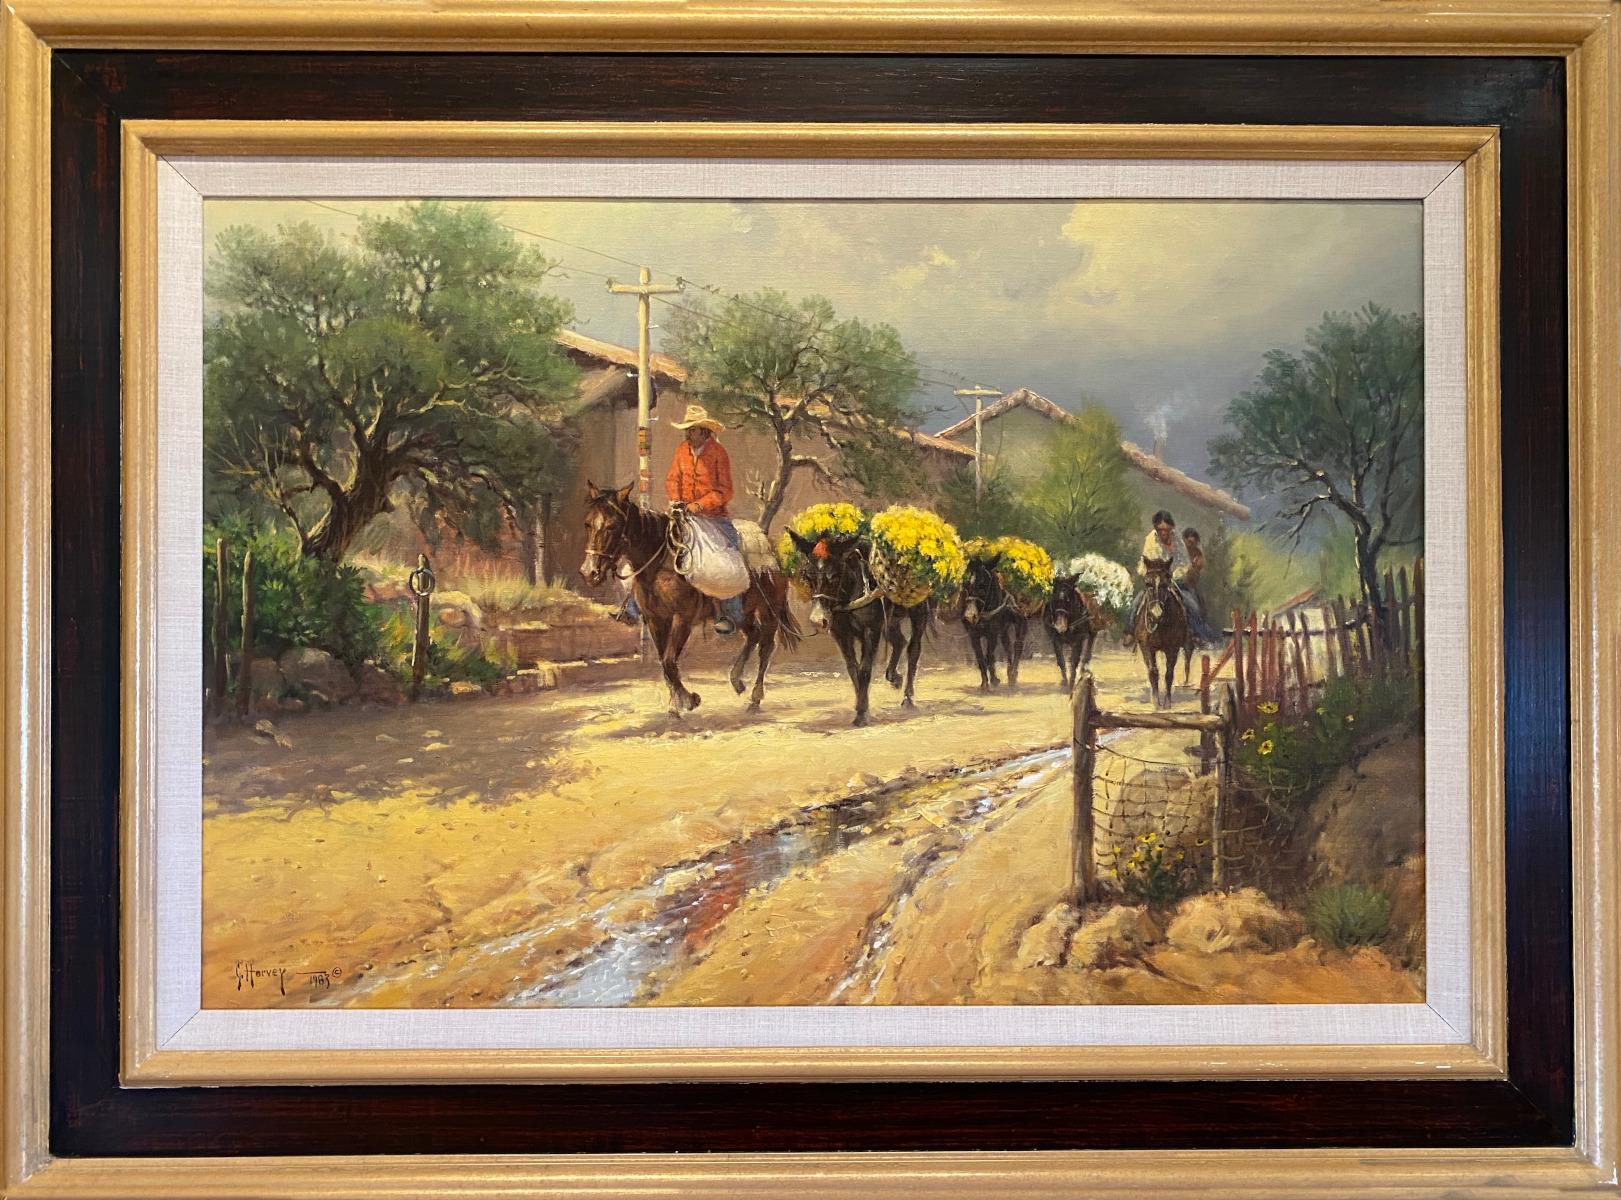 G. Harvey Landscape Painting - "FLOWERS TO MARKET" (IXTAPAN MEXICO) 1983 G. HARVEY  PICTURED G. HARVEY BOOK